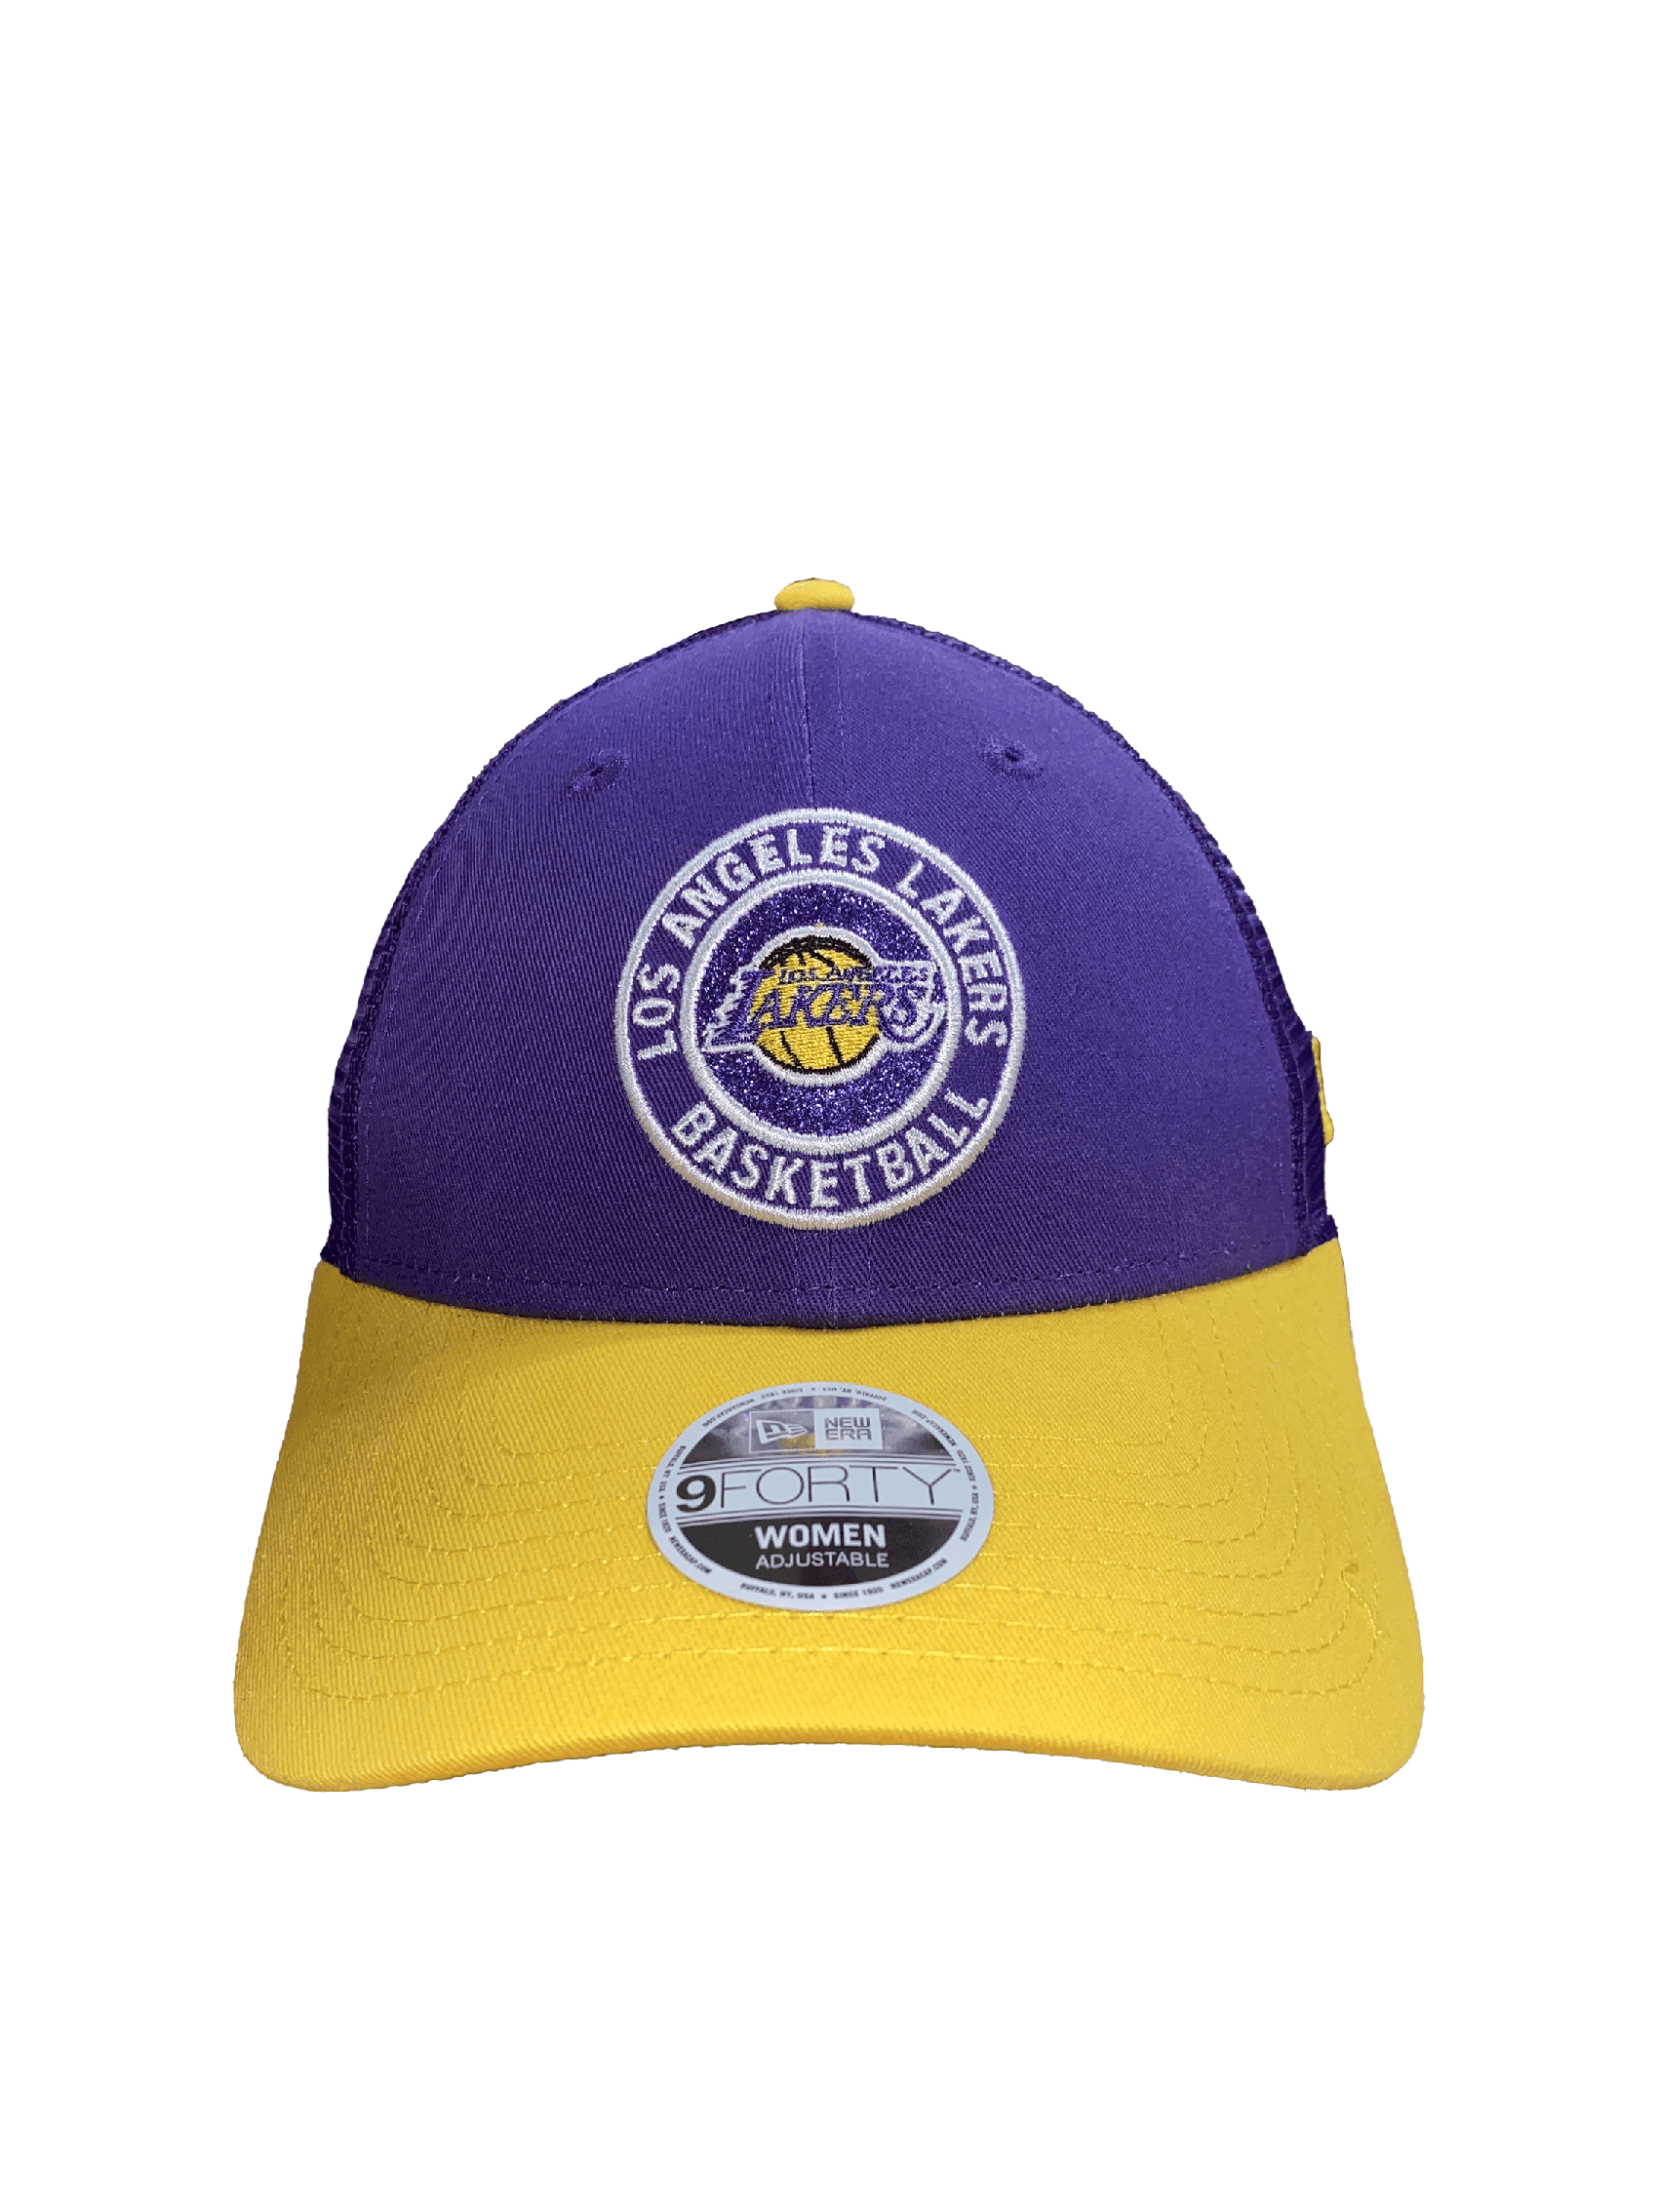 womens lakers hat